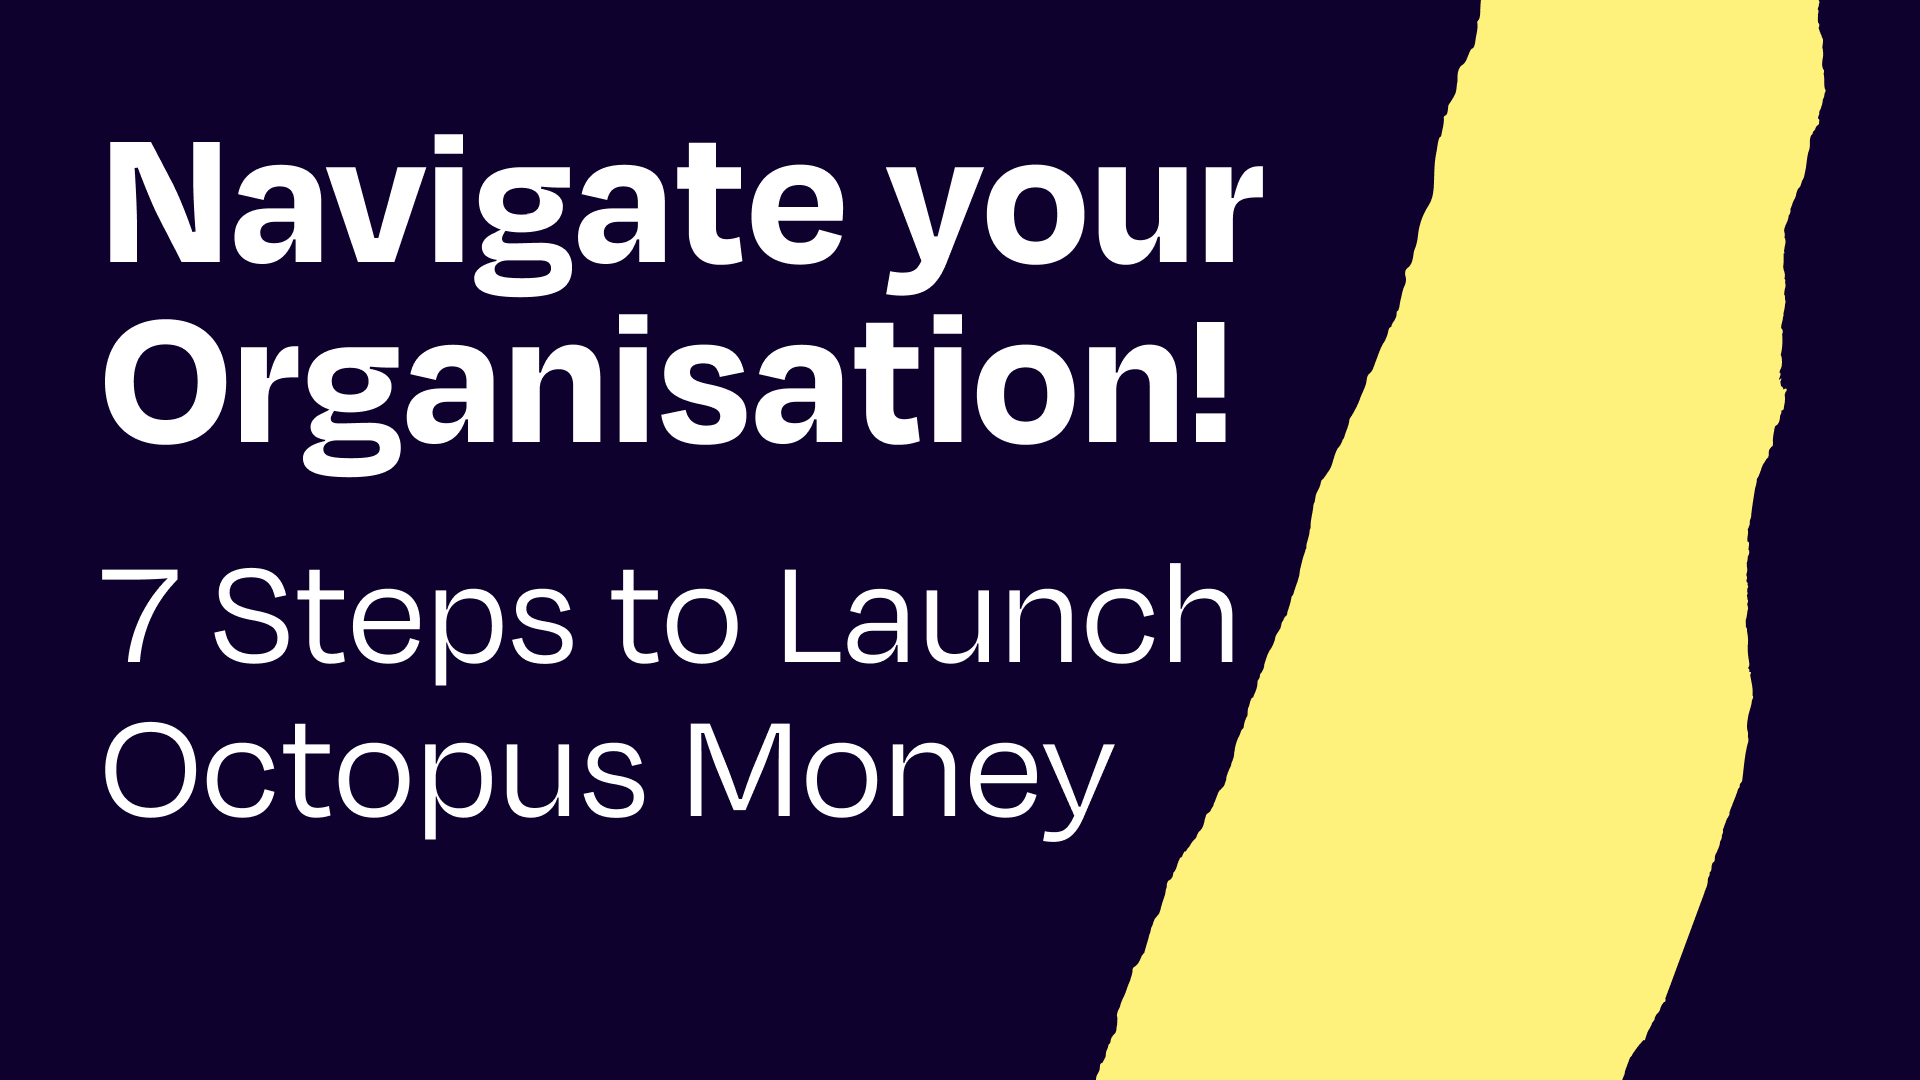 Navigate your organisation and get Octopus Money approved, signed and launched quickly! 